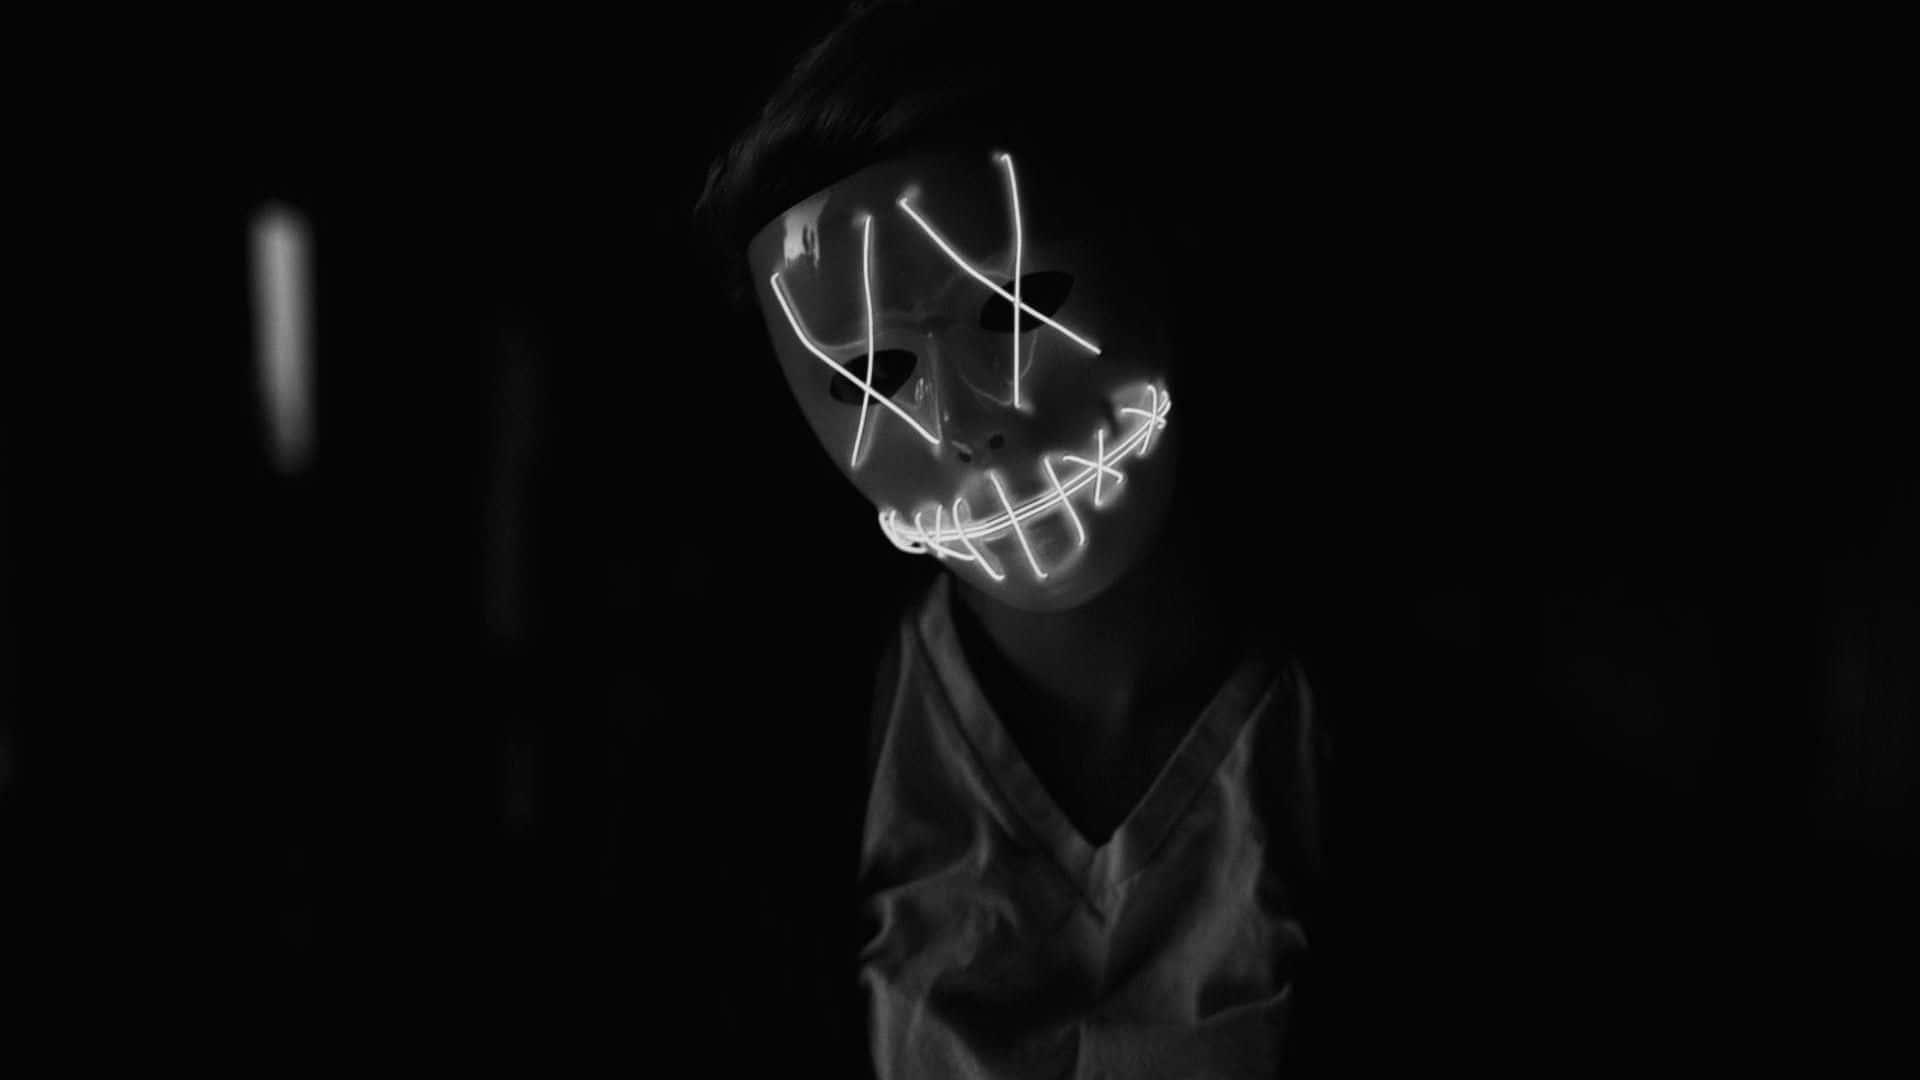 A Person With A Glowing Mask In The Dark